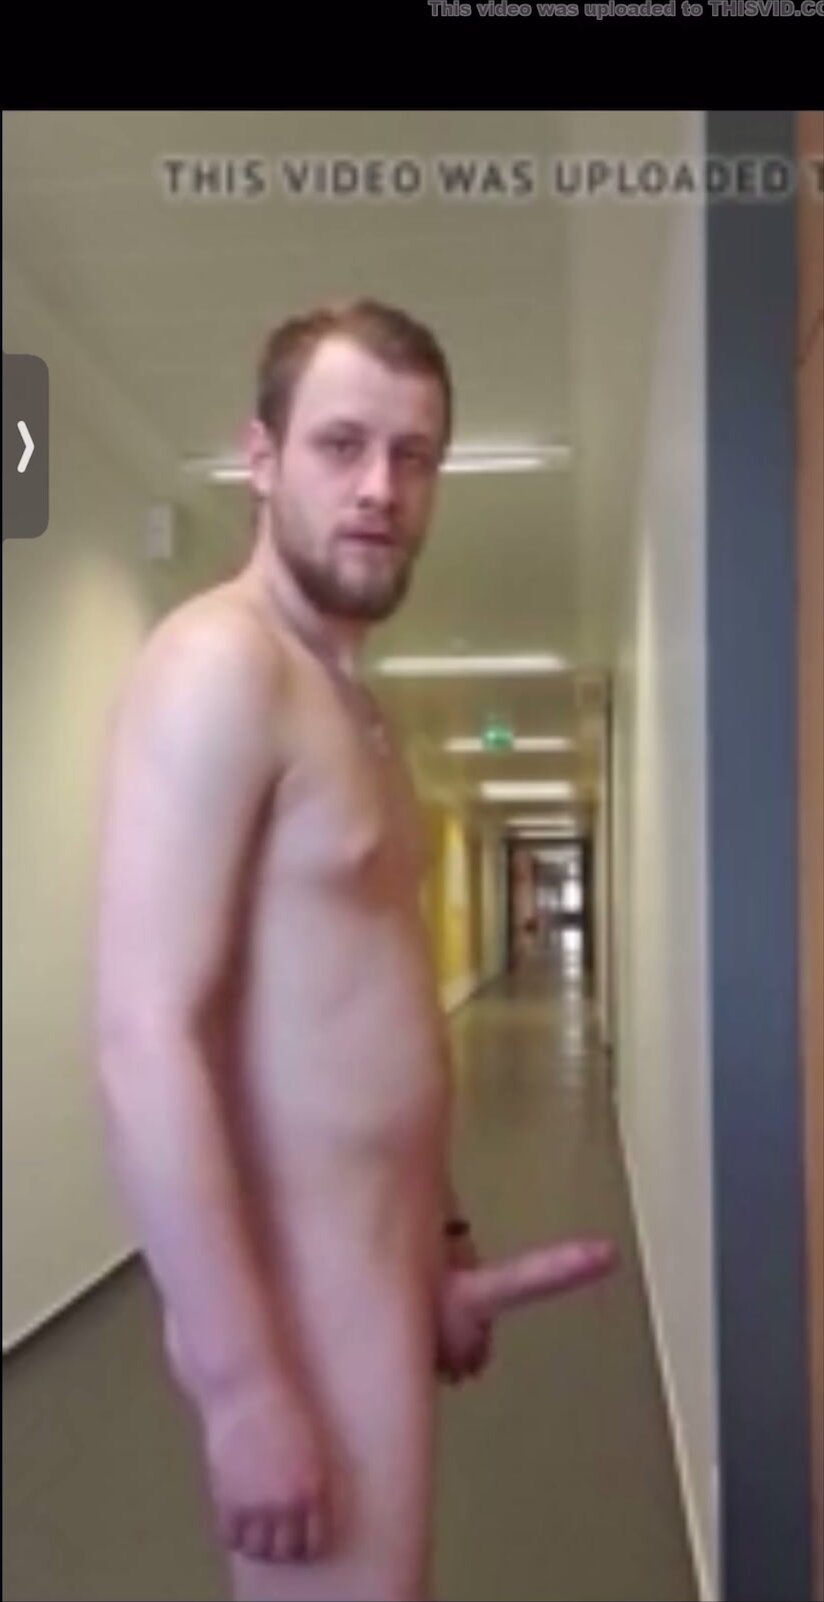 Dublin lad naked in work place